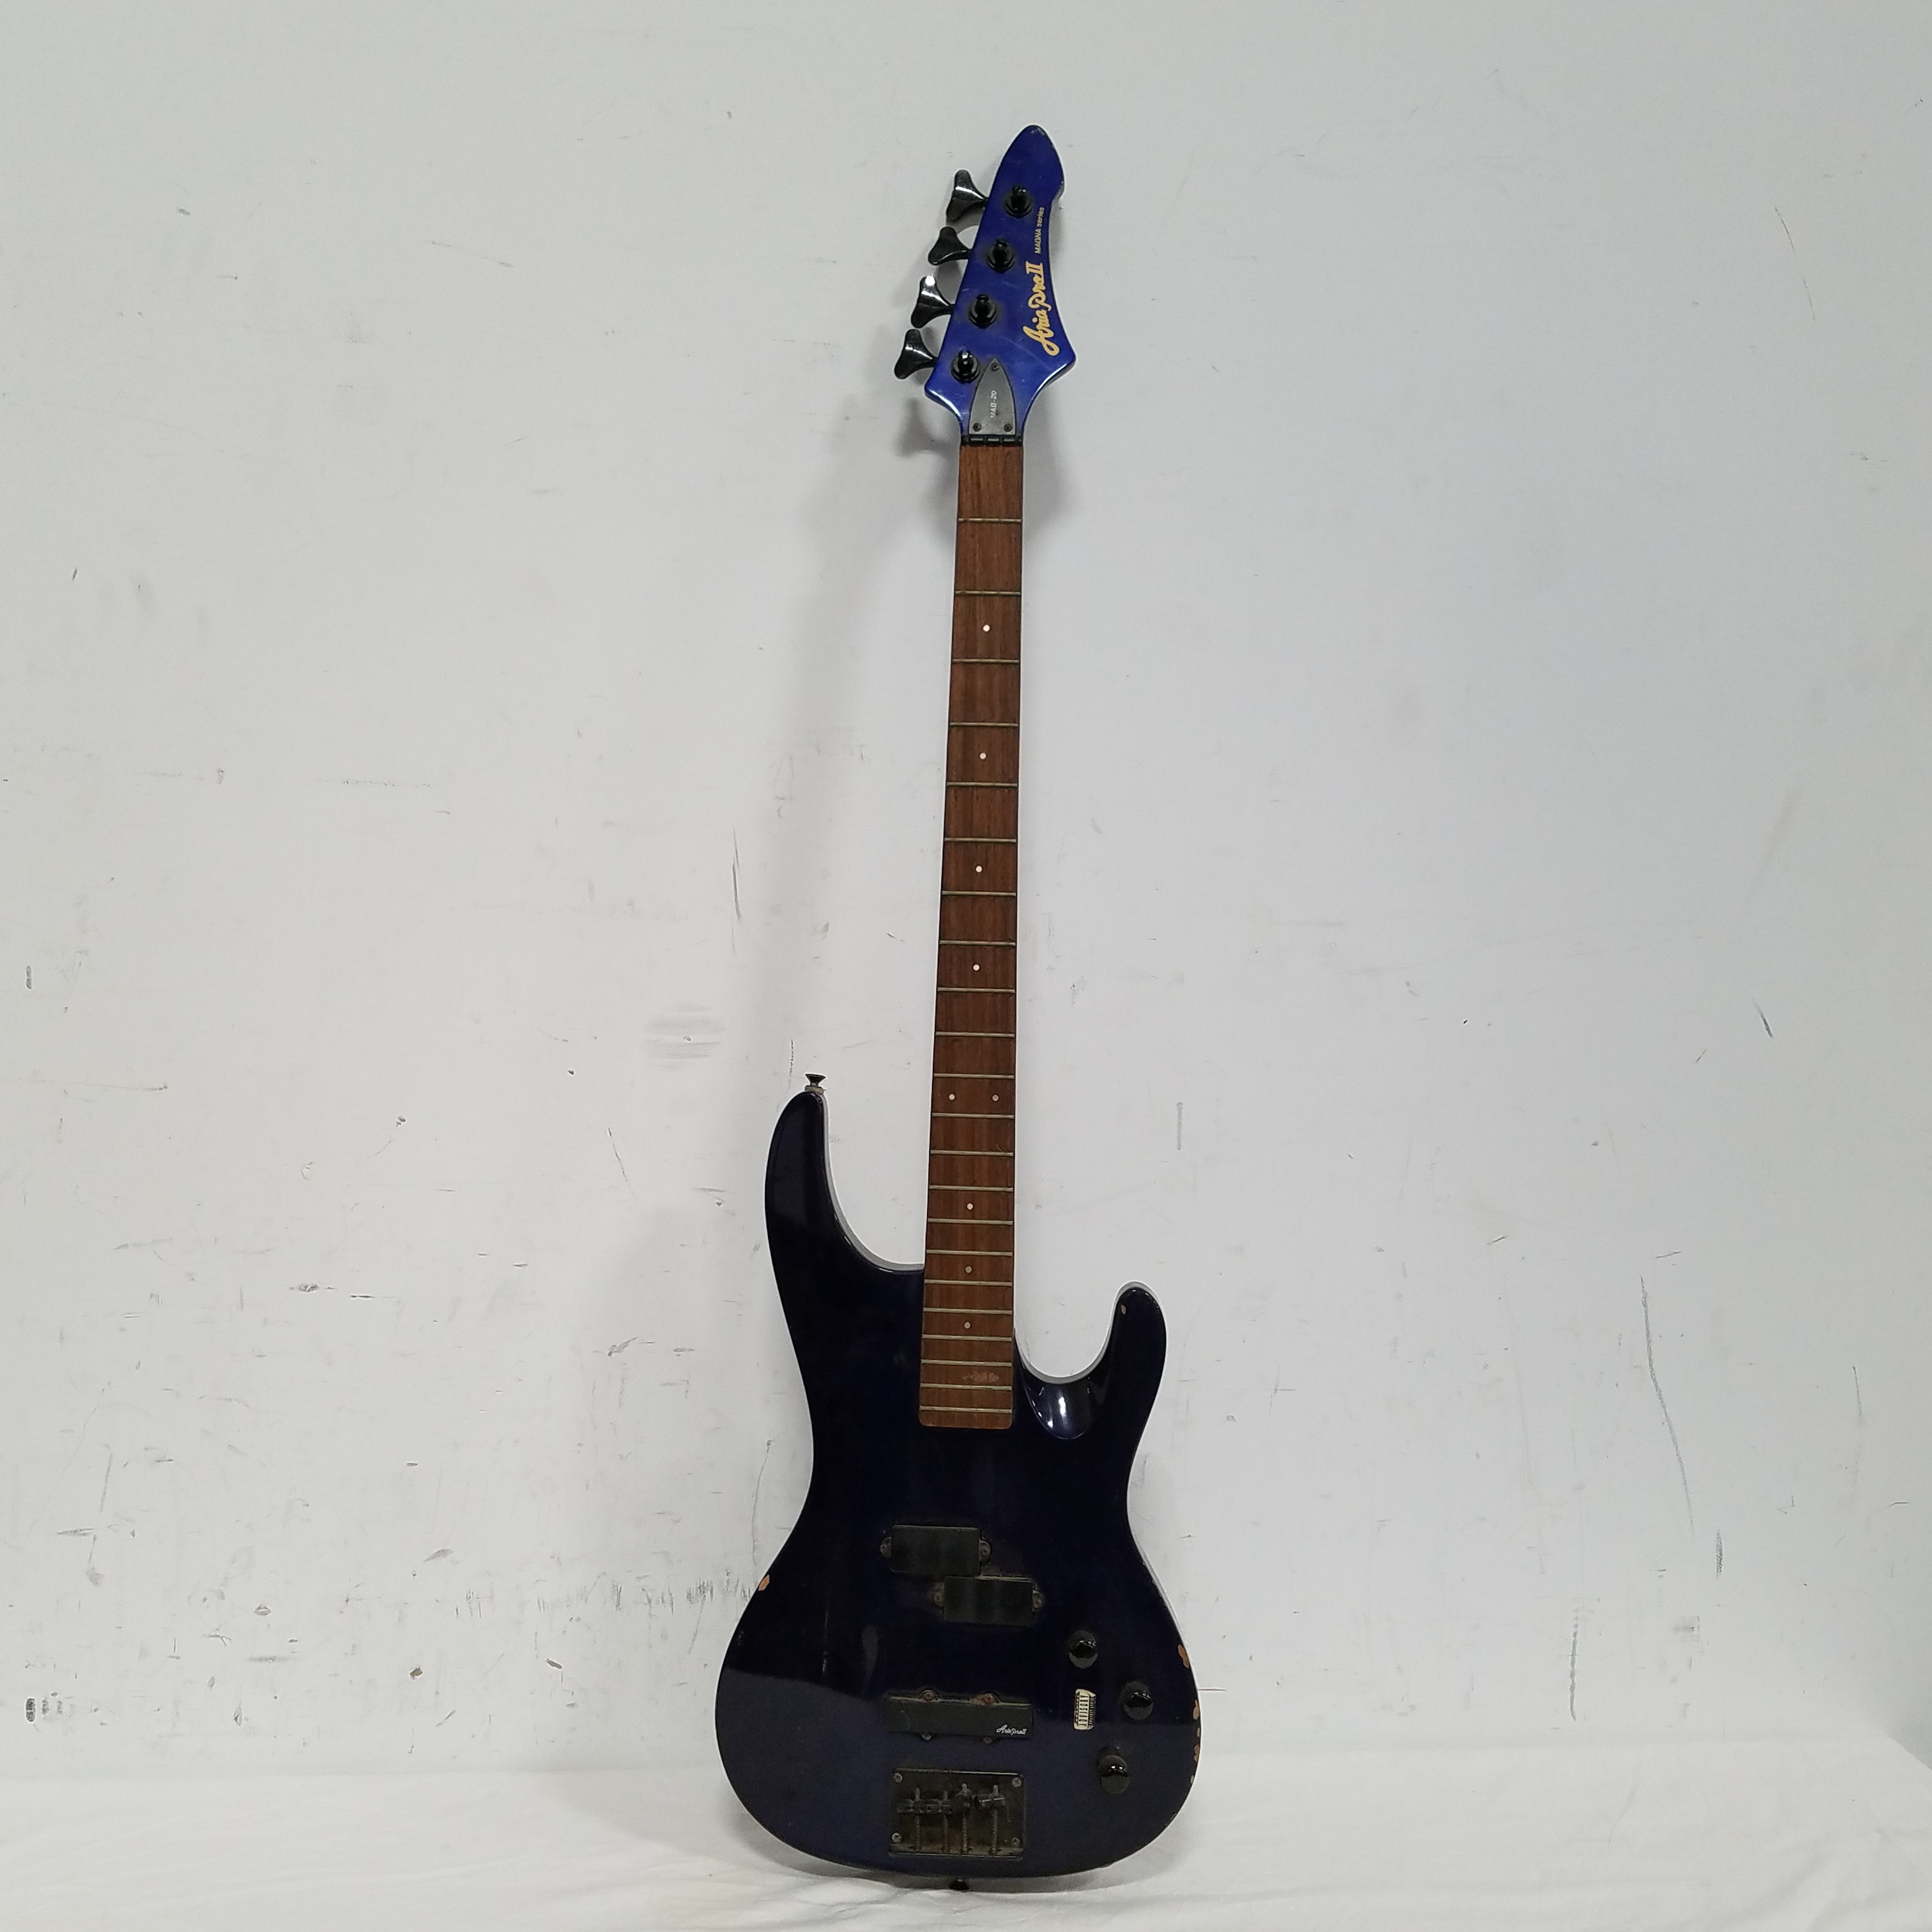 Buy Electric Bass Guitar- Aria Pro II MAB 20 - MAGNA Series - Electric Deep  Blue Guitar for USD 119.99 | GoodwillFinds